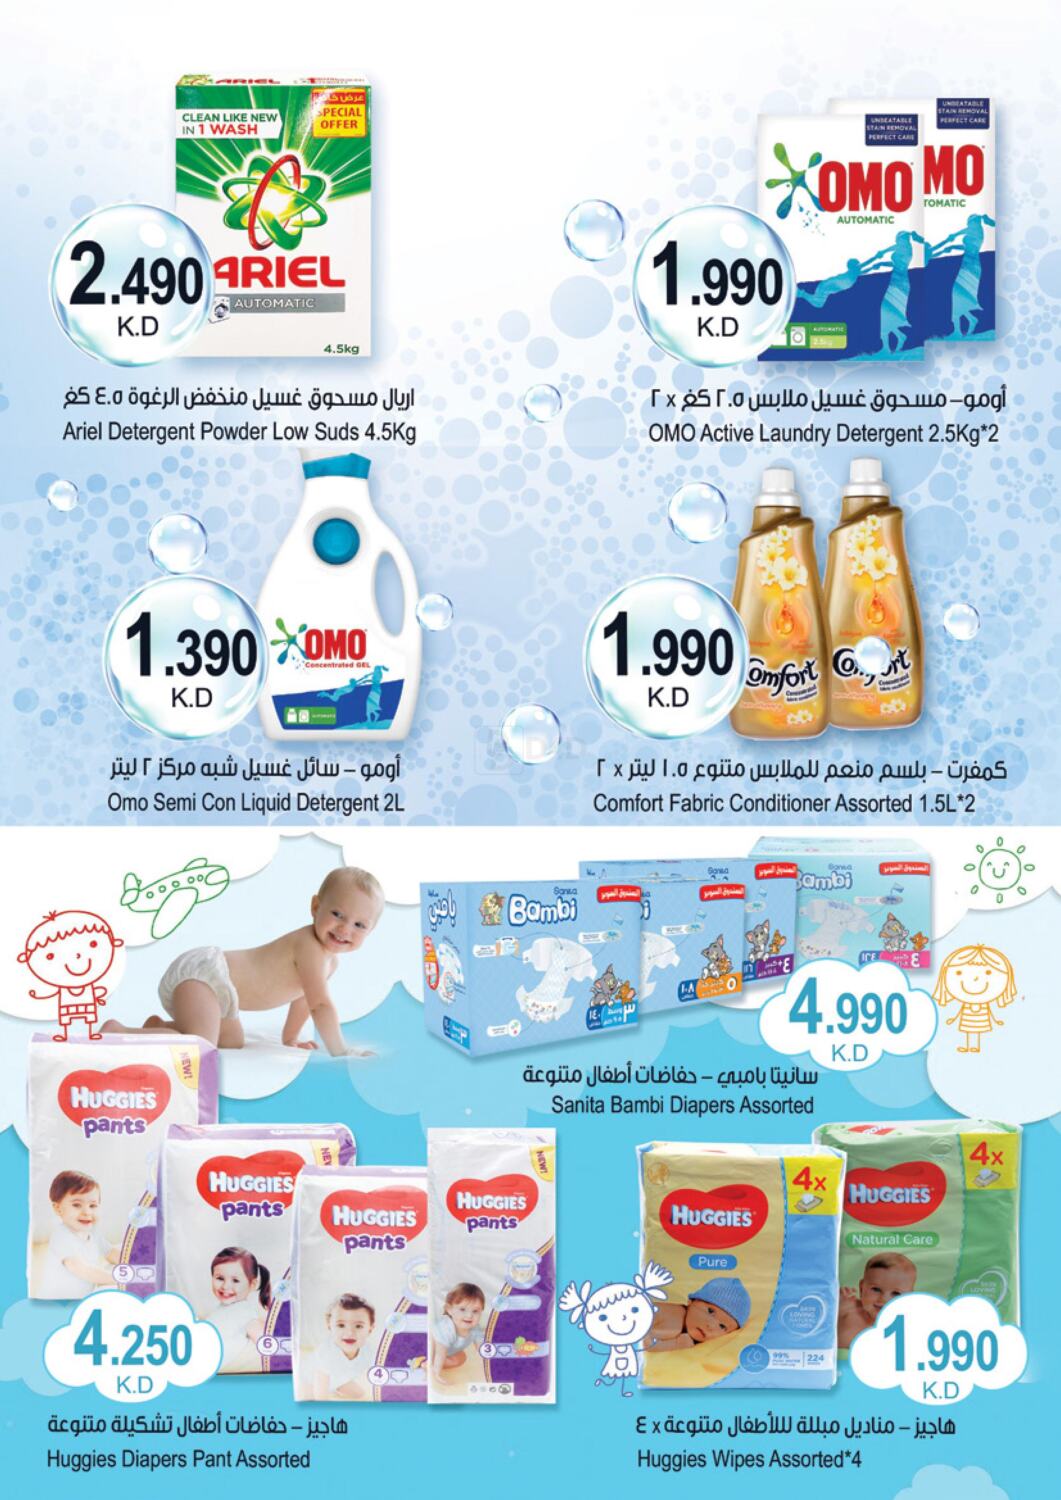 Saveco Great Deals in Kuwait. Till 20th September